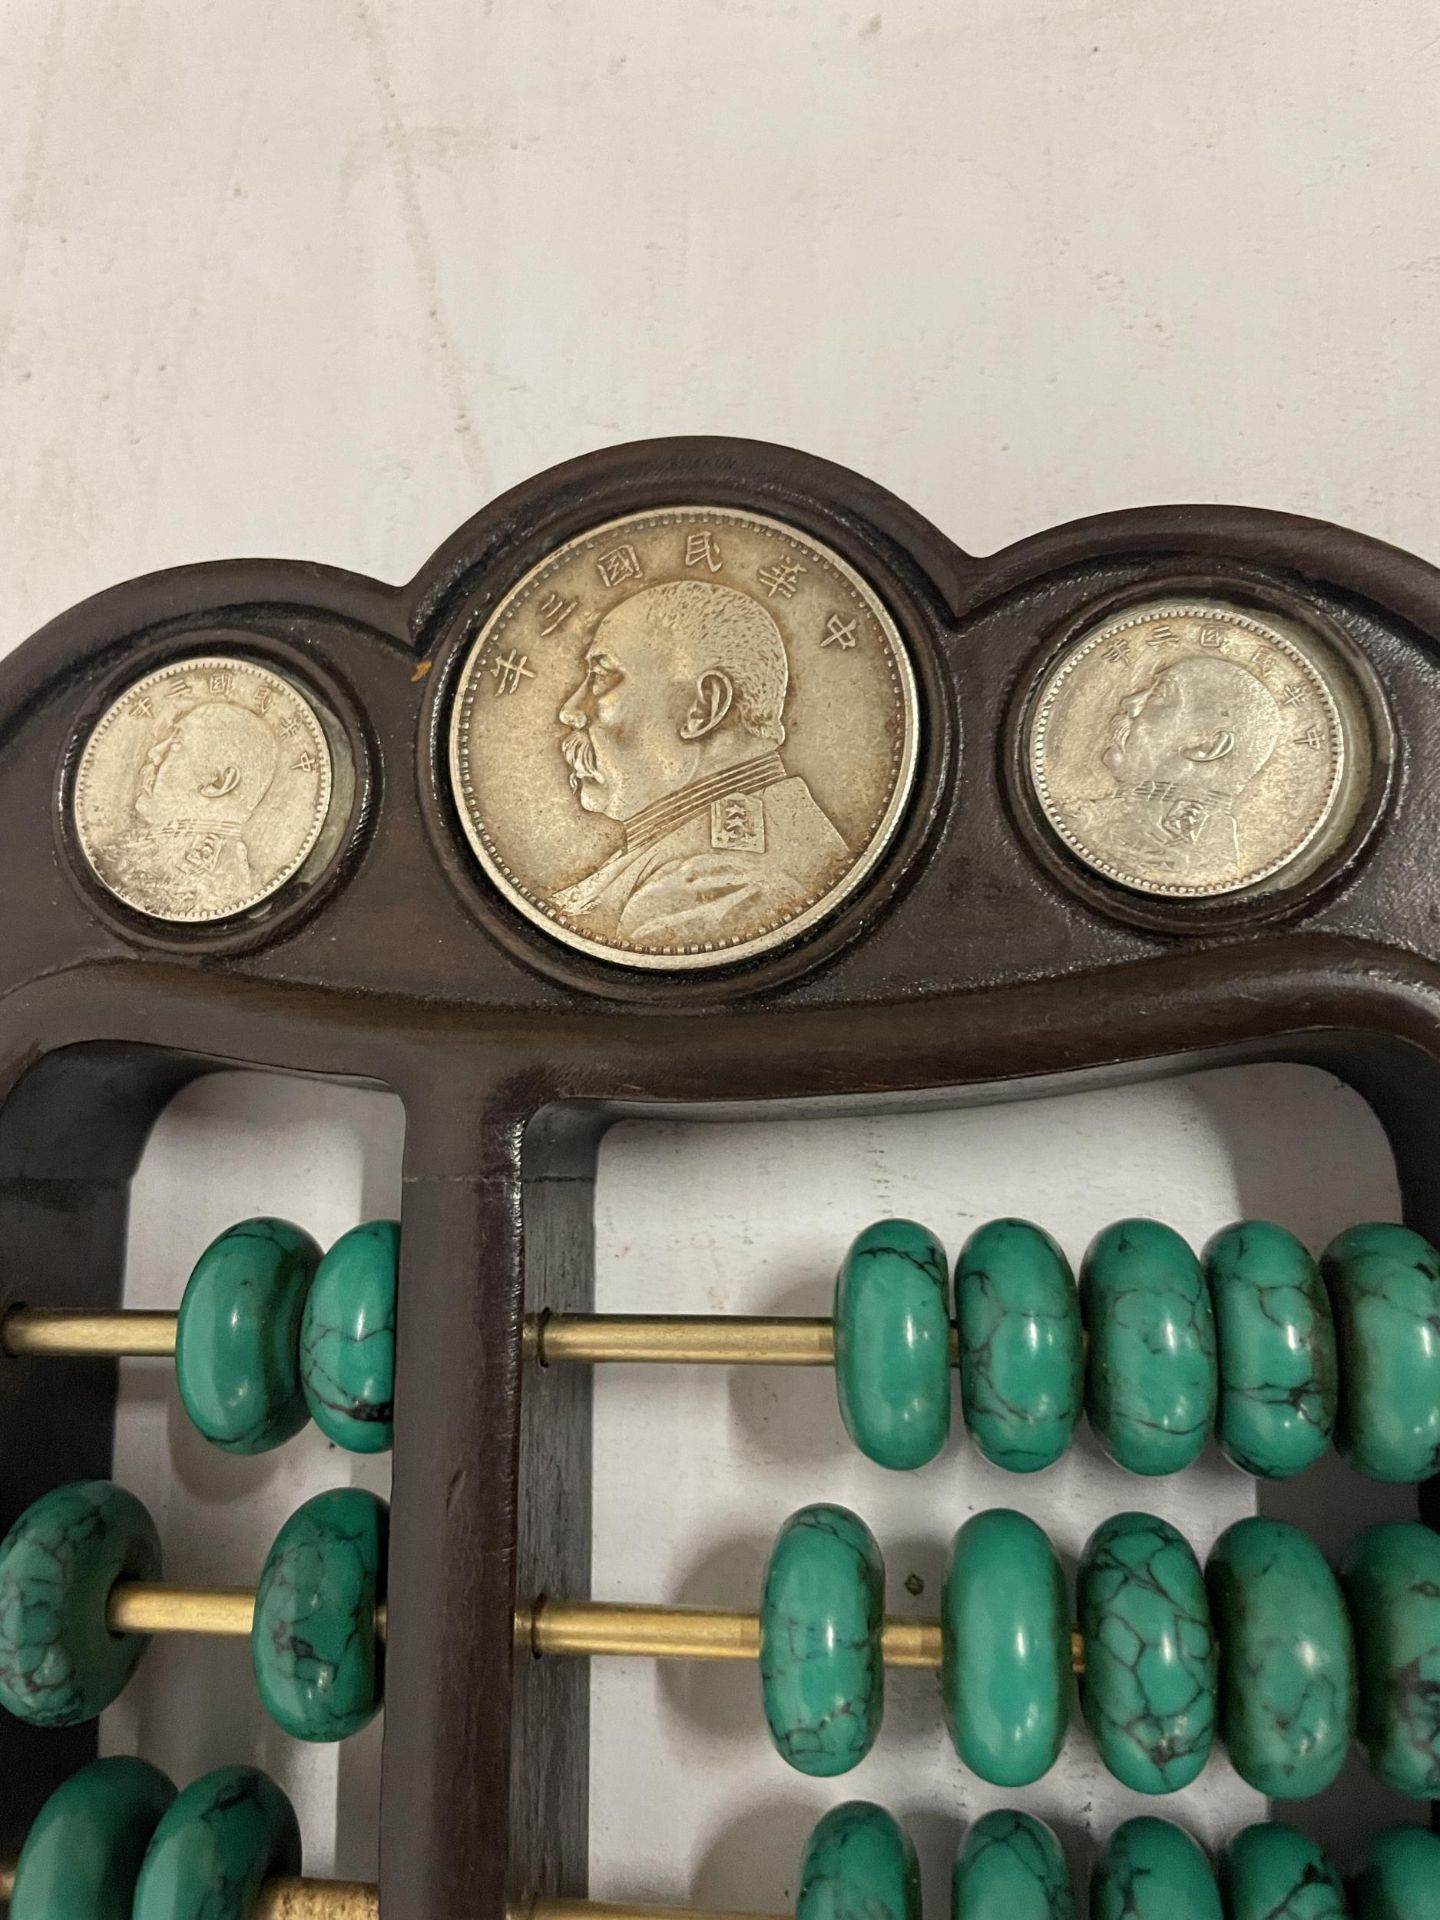 A CHINESE ABACUS WITH MALACHITE COUNTERS AND SILVER COINS - Image 2 of 3